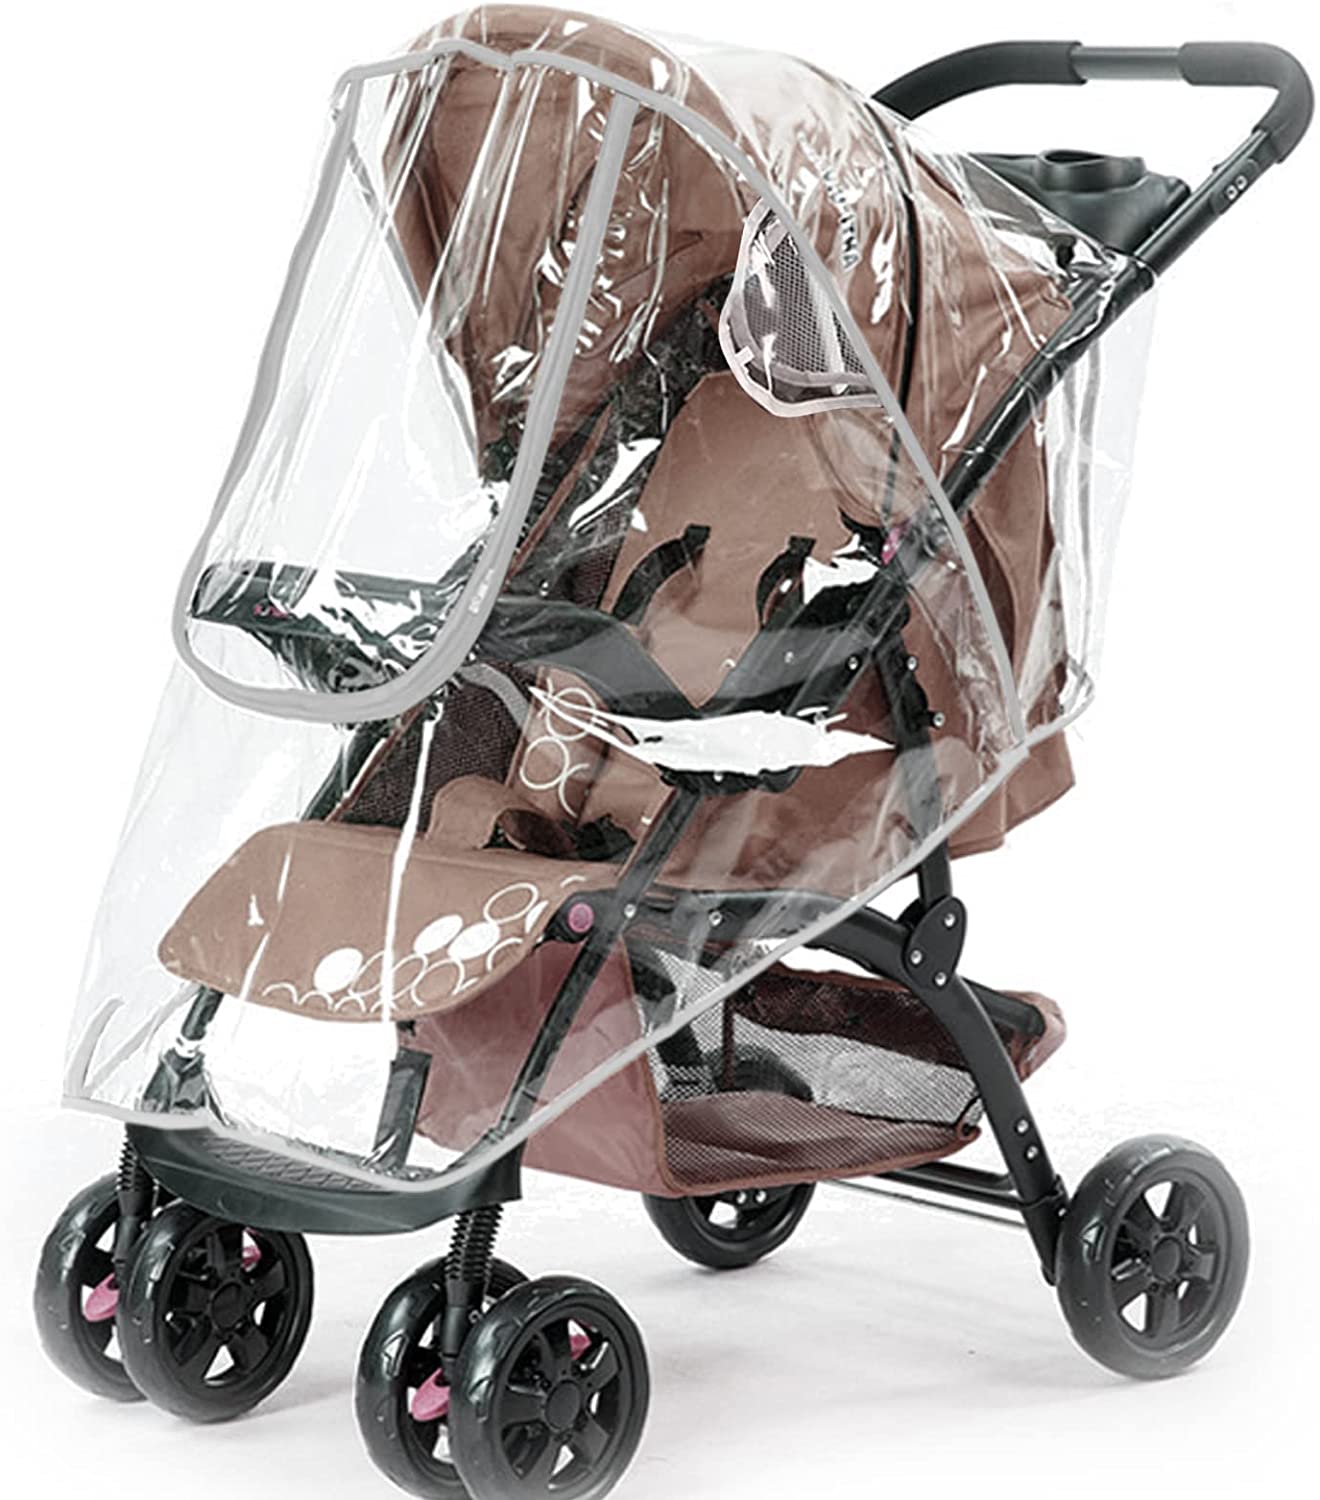 Yoofoss Baby Stroller Rain Cover Universal Stroller Covers Waterproof and Windproof Weather Shields Accessories with Curtain 